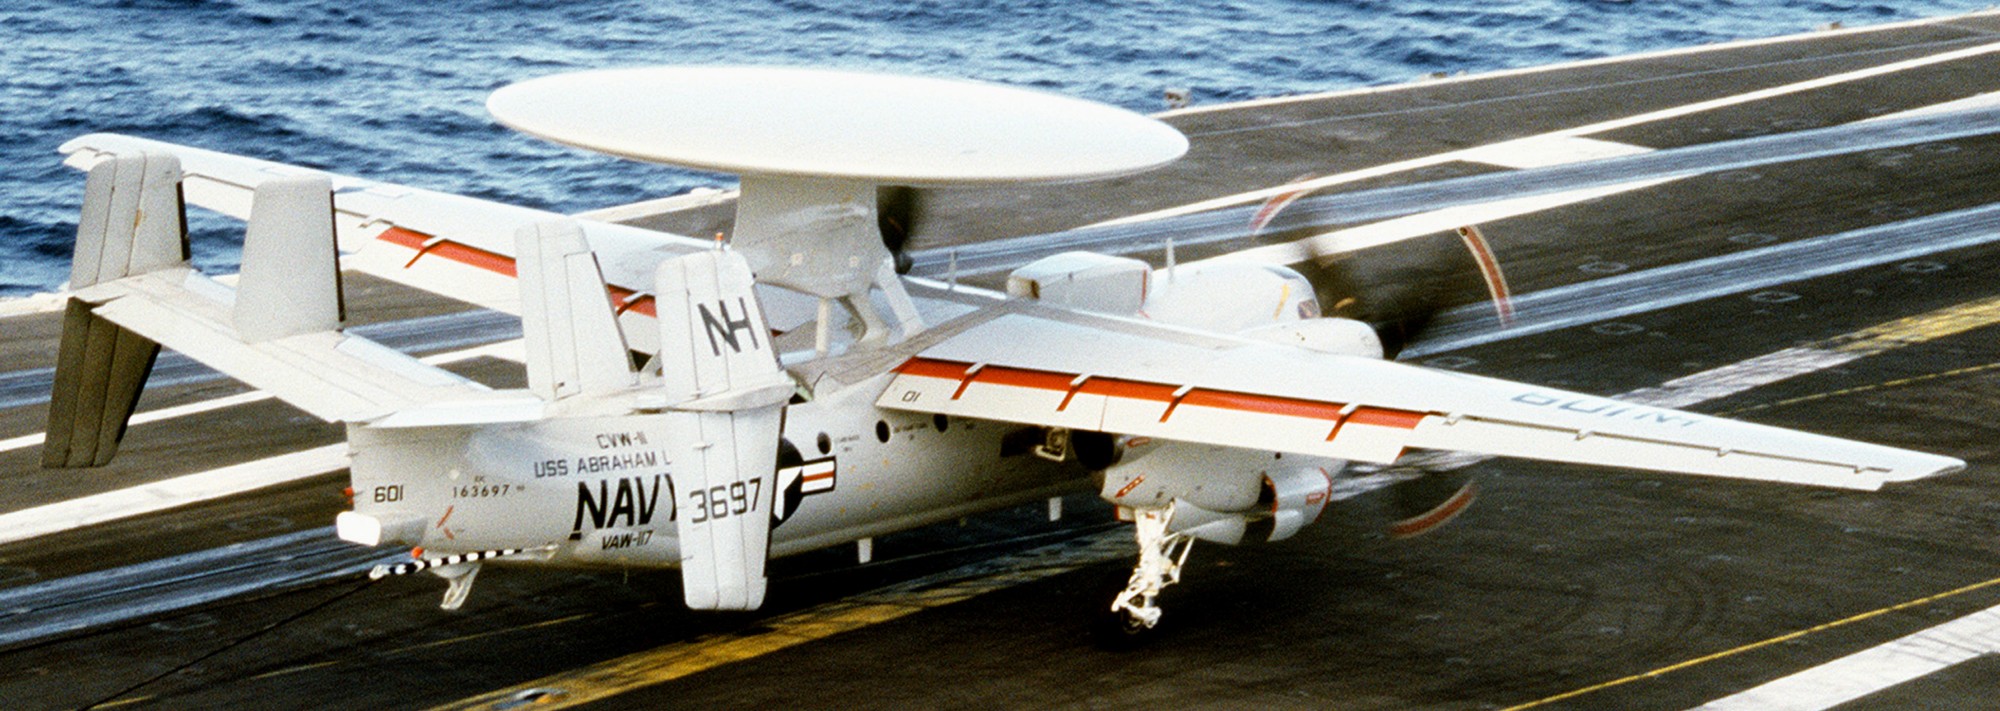 vaw-117 wallbangers carrier airborne early warning squadron navy e-2c hawkeye cvw-11 uss abraham lincoln cvn-72 85